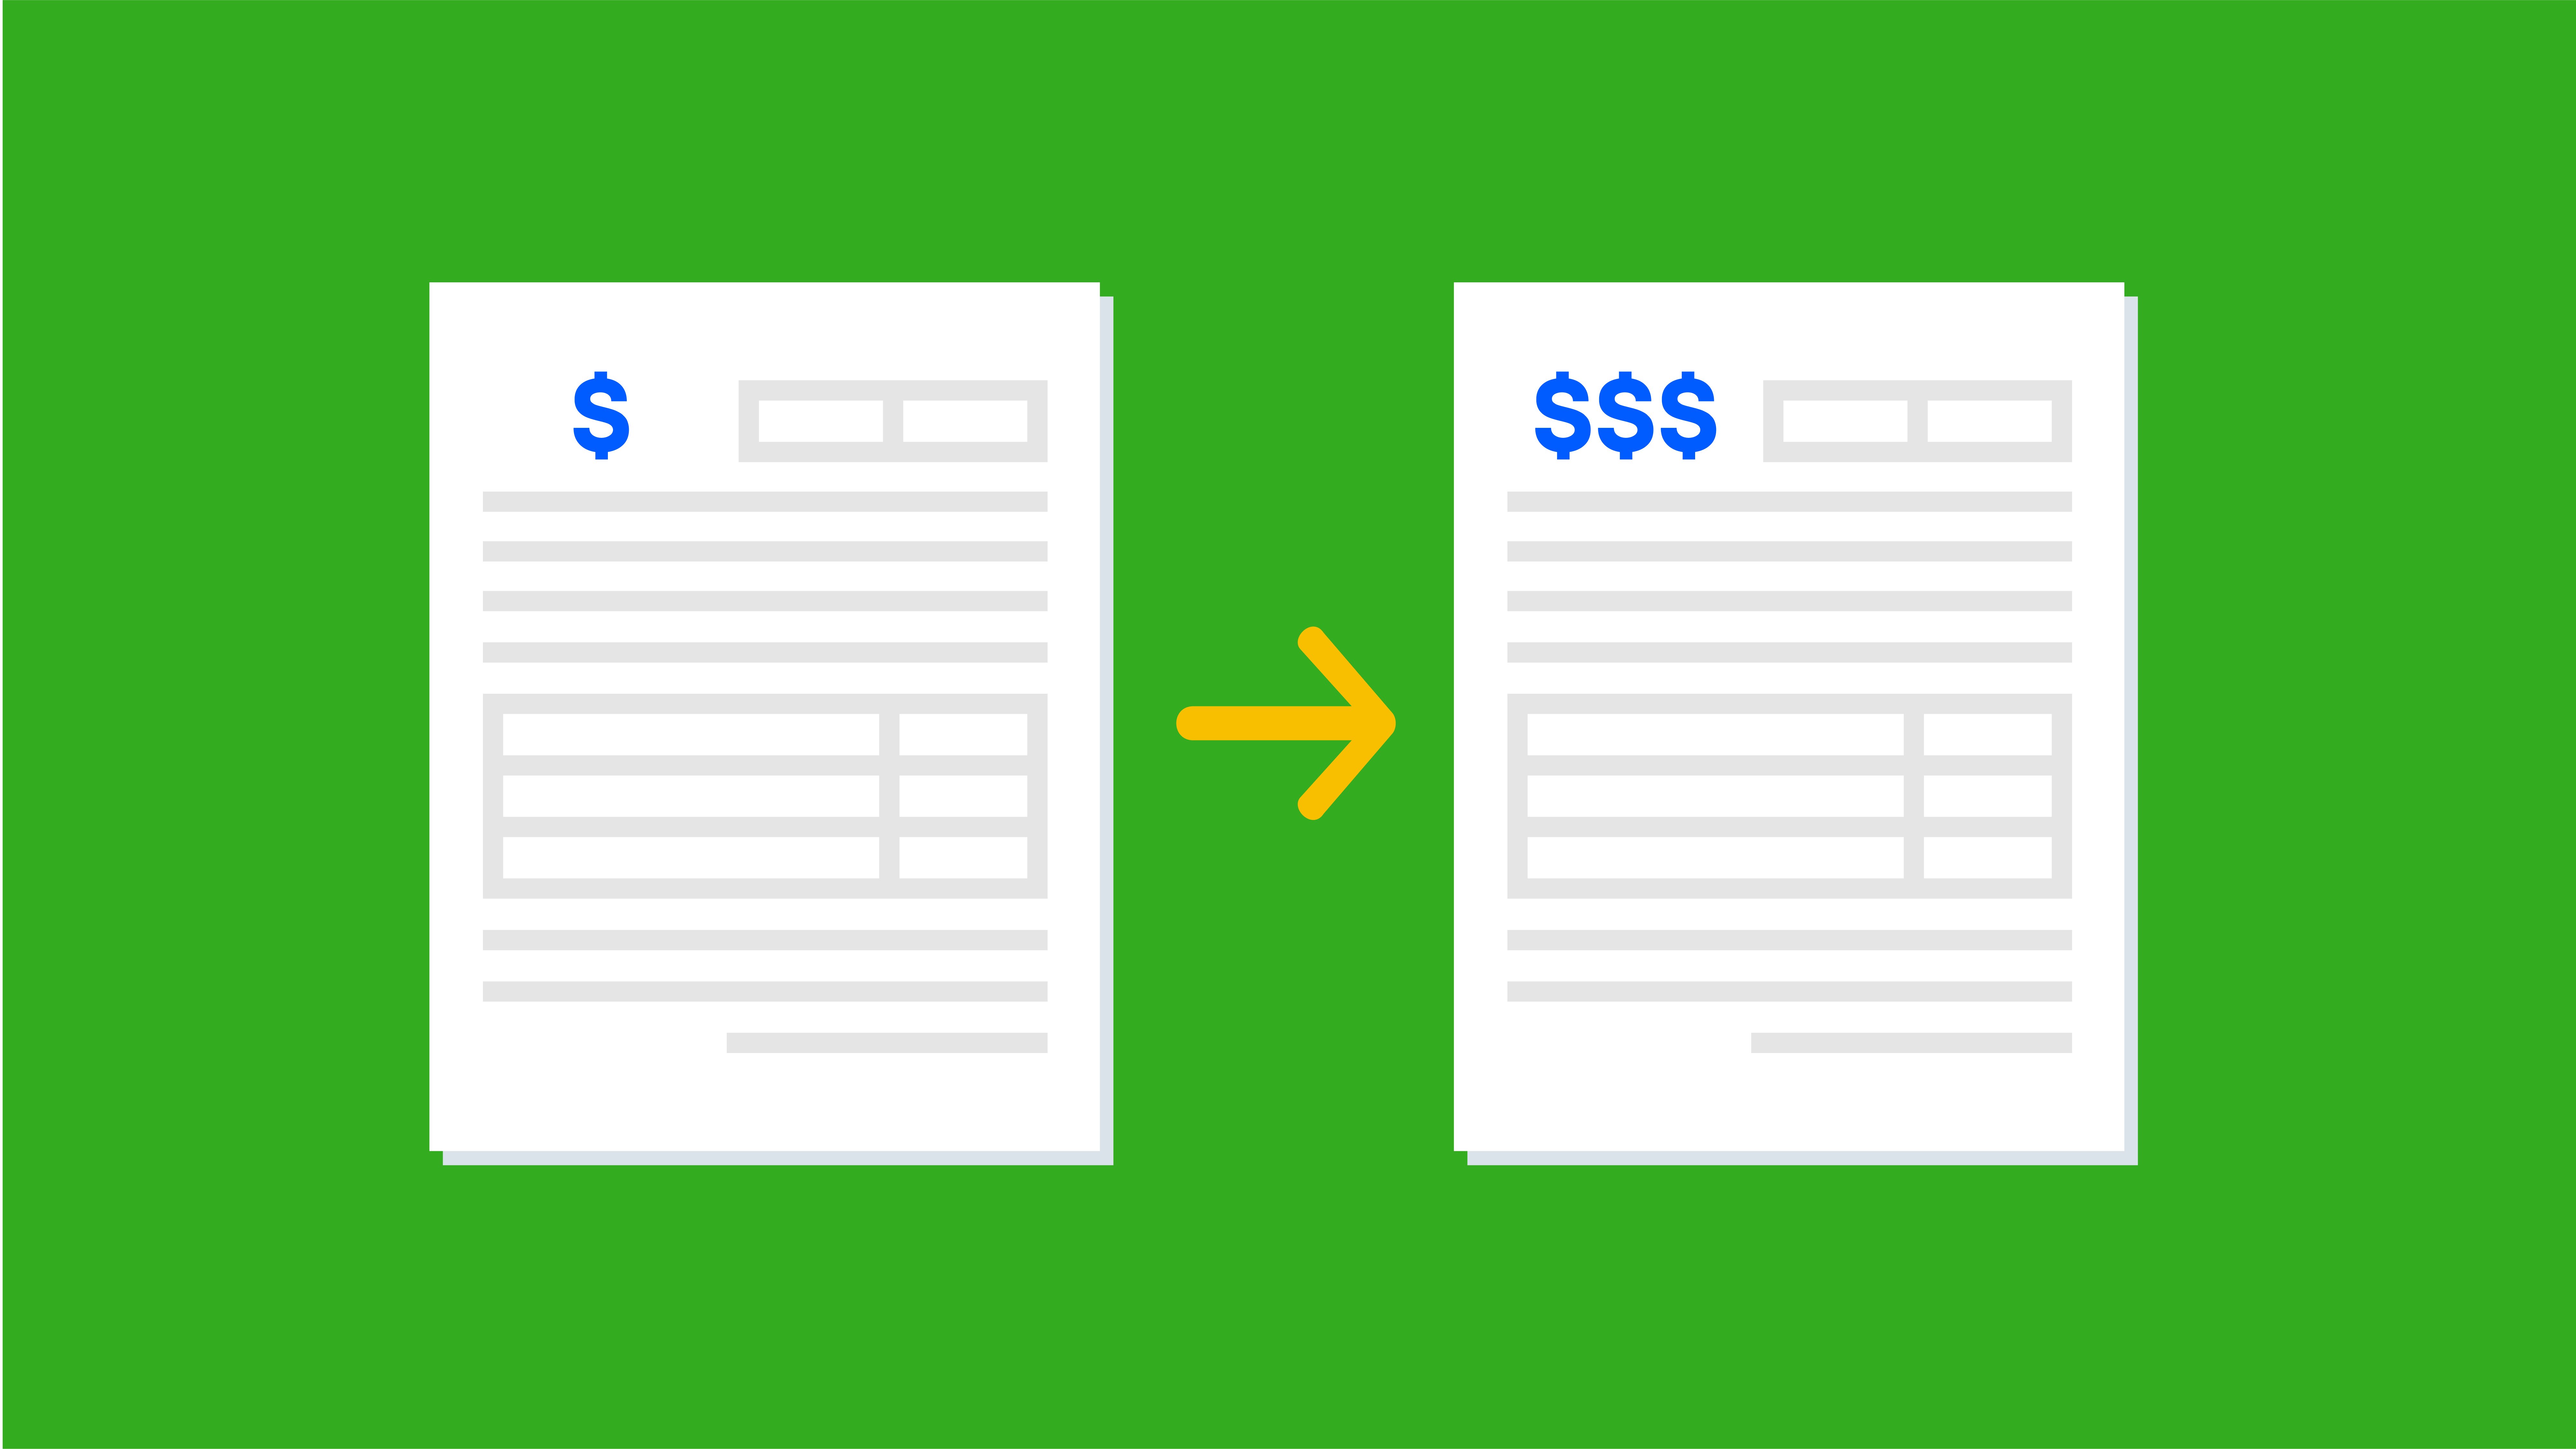 Illustration of two invoices with different dollar amounts.